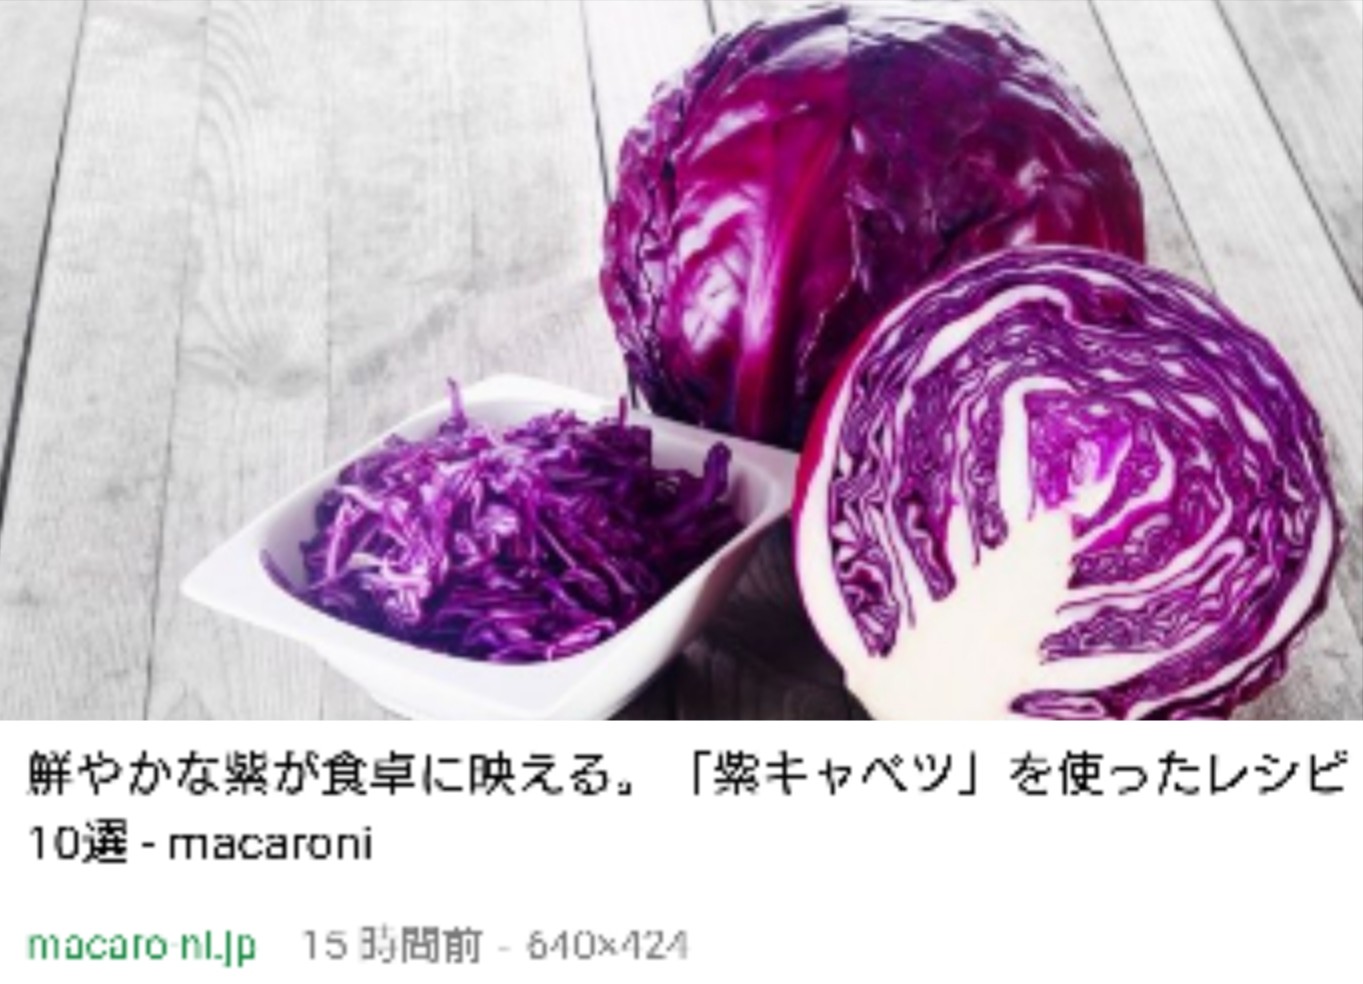 Lucy2 Lennonheadnew Endurure I Know It Is Called Red Cabbage In English But It Is Called Murasaki Kyabetsu 紫キャベツ In Japanese Meaning Purple Cabbage So I Translated As Such Some People